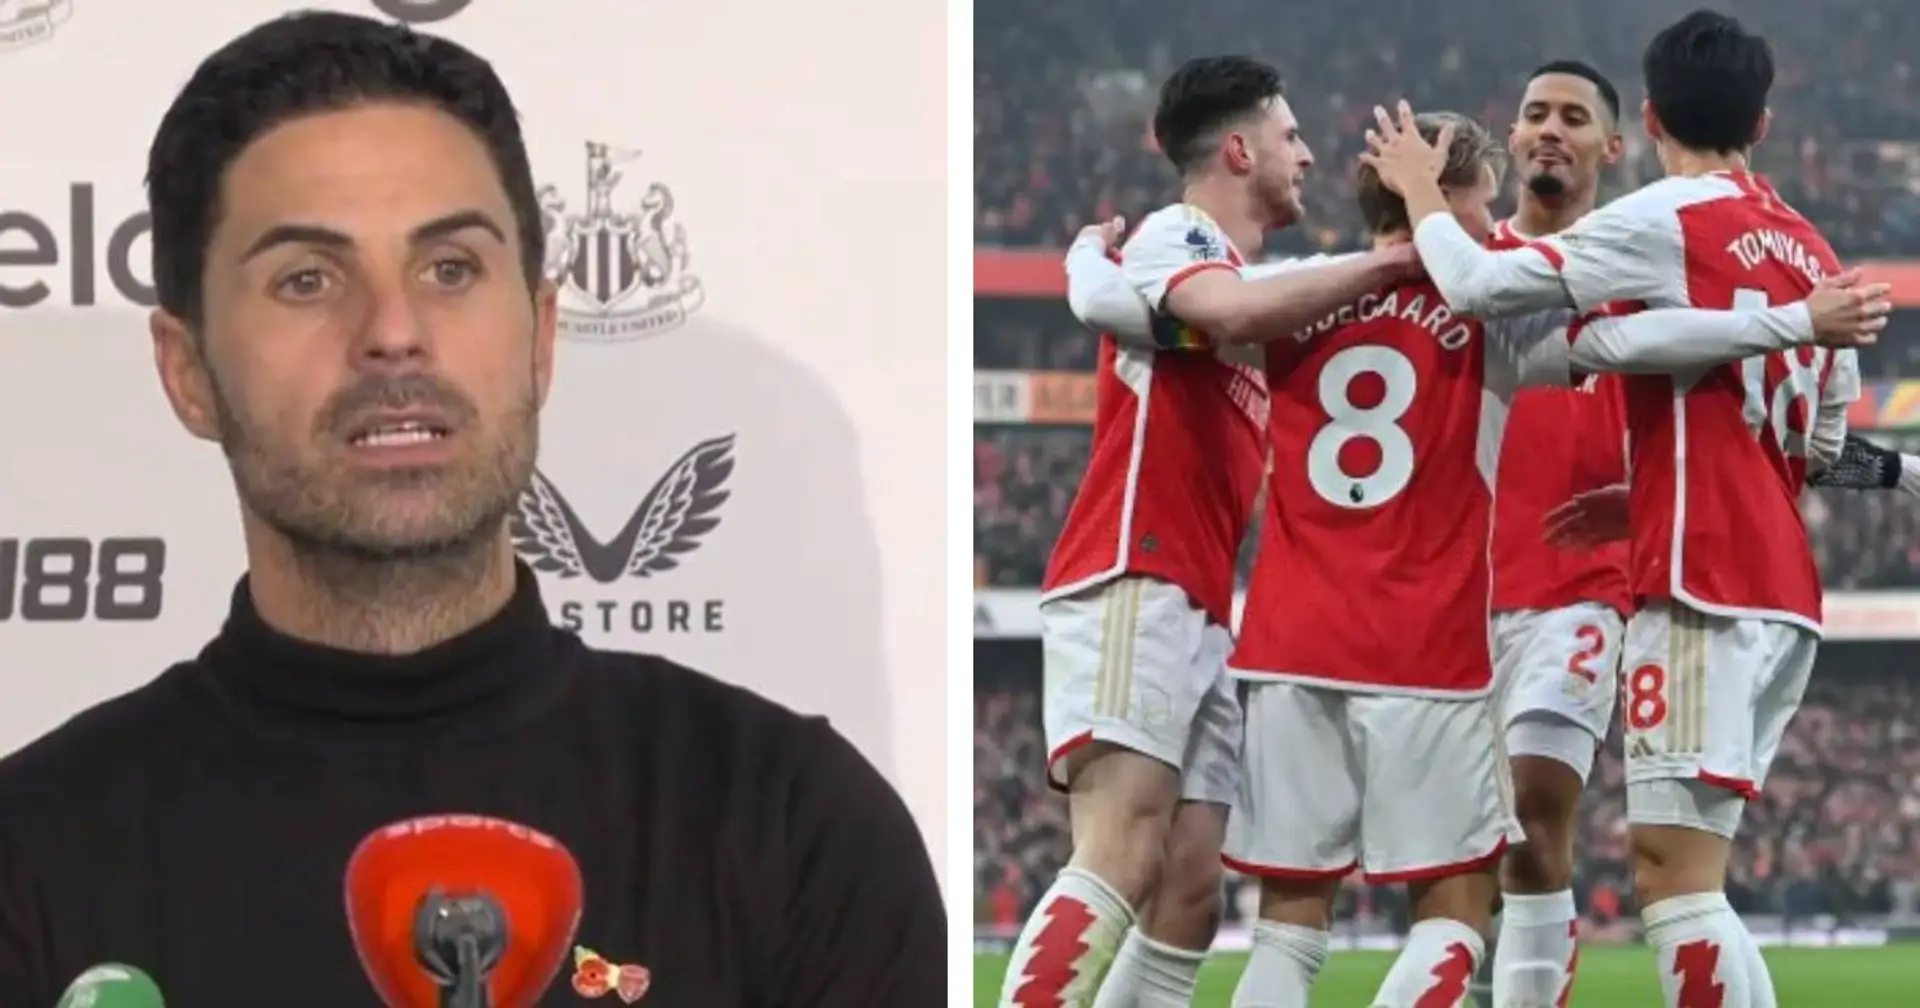 'We had chances but didn't take them': Arteta reacts to 2-1 win over Wolves